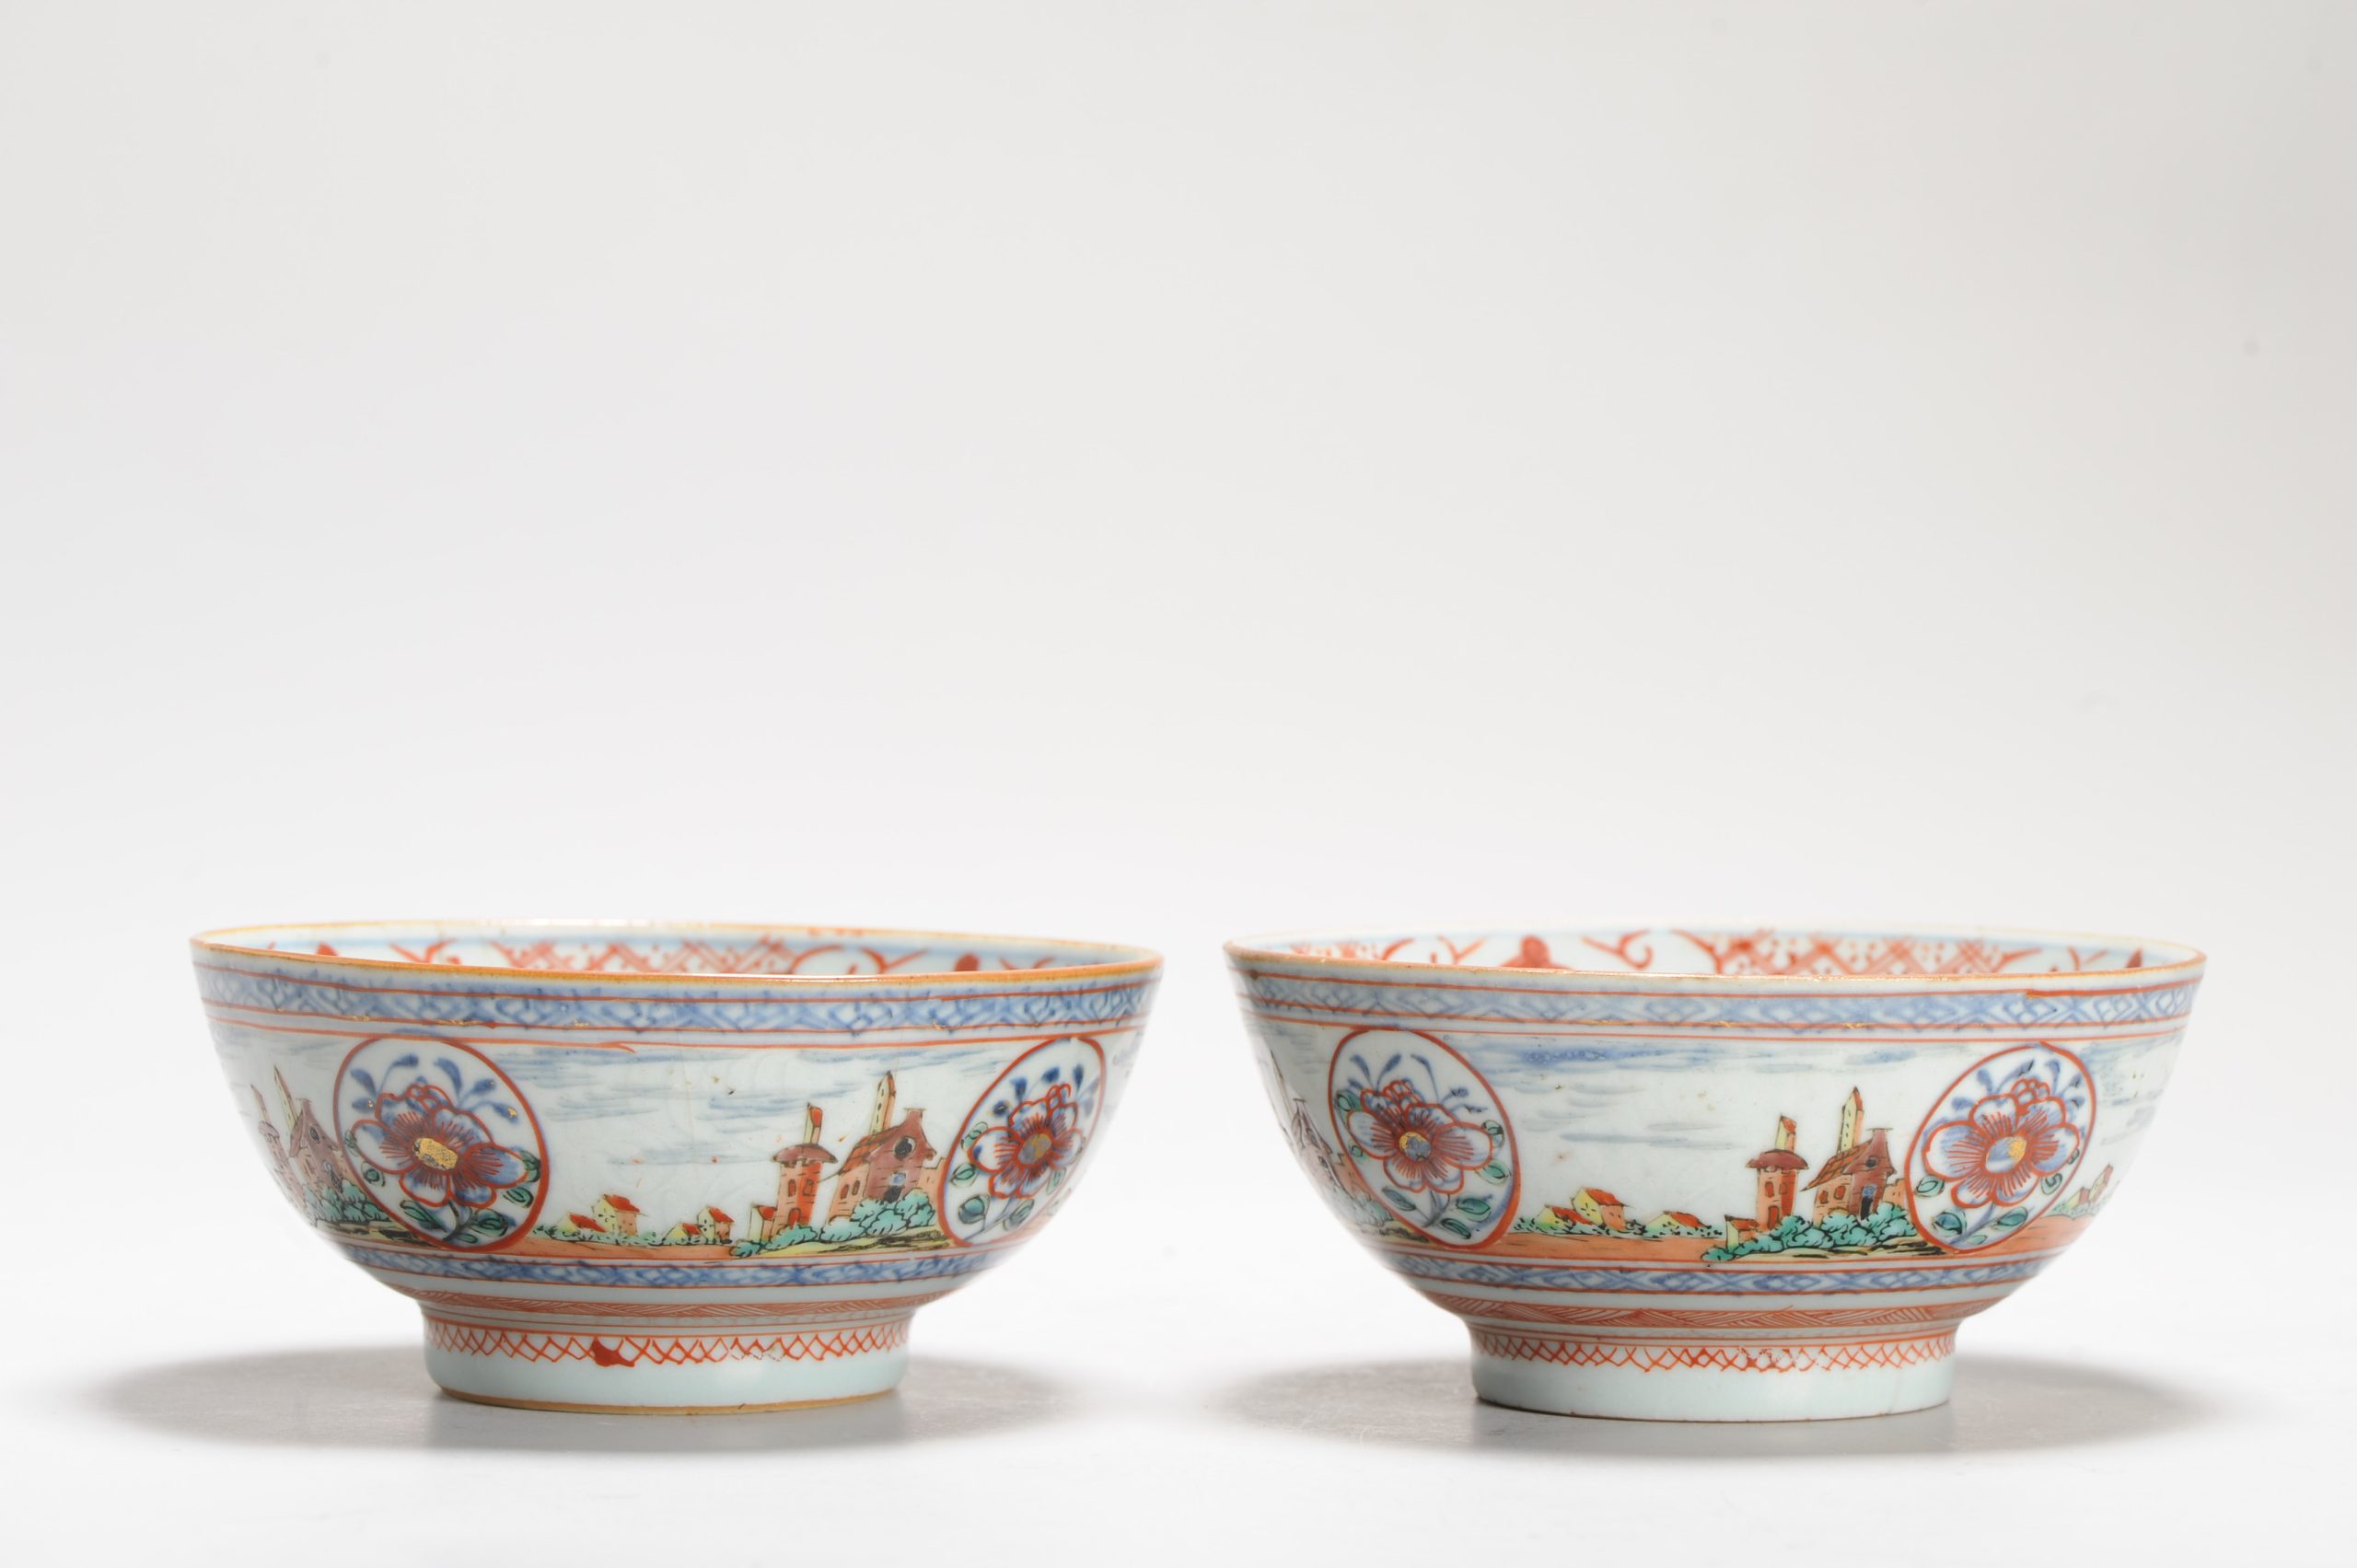 1258 & 1259 A Pair of Landscape Bowls Painted in Europe on a Chinese Blue and White. Amsterdam Bont